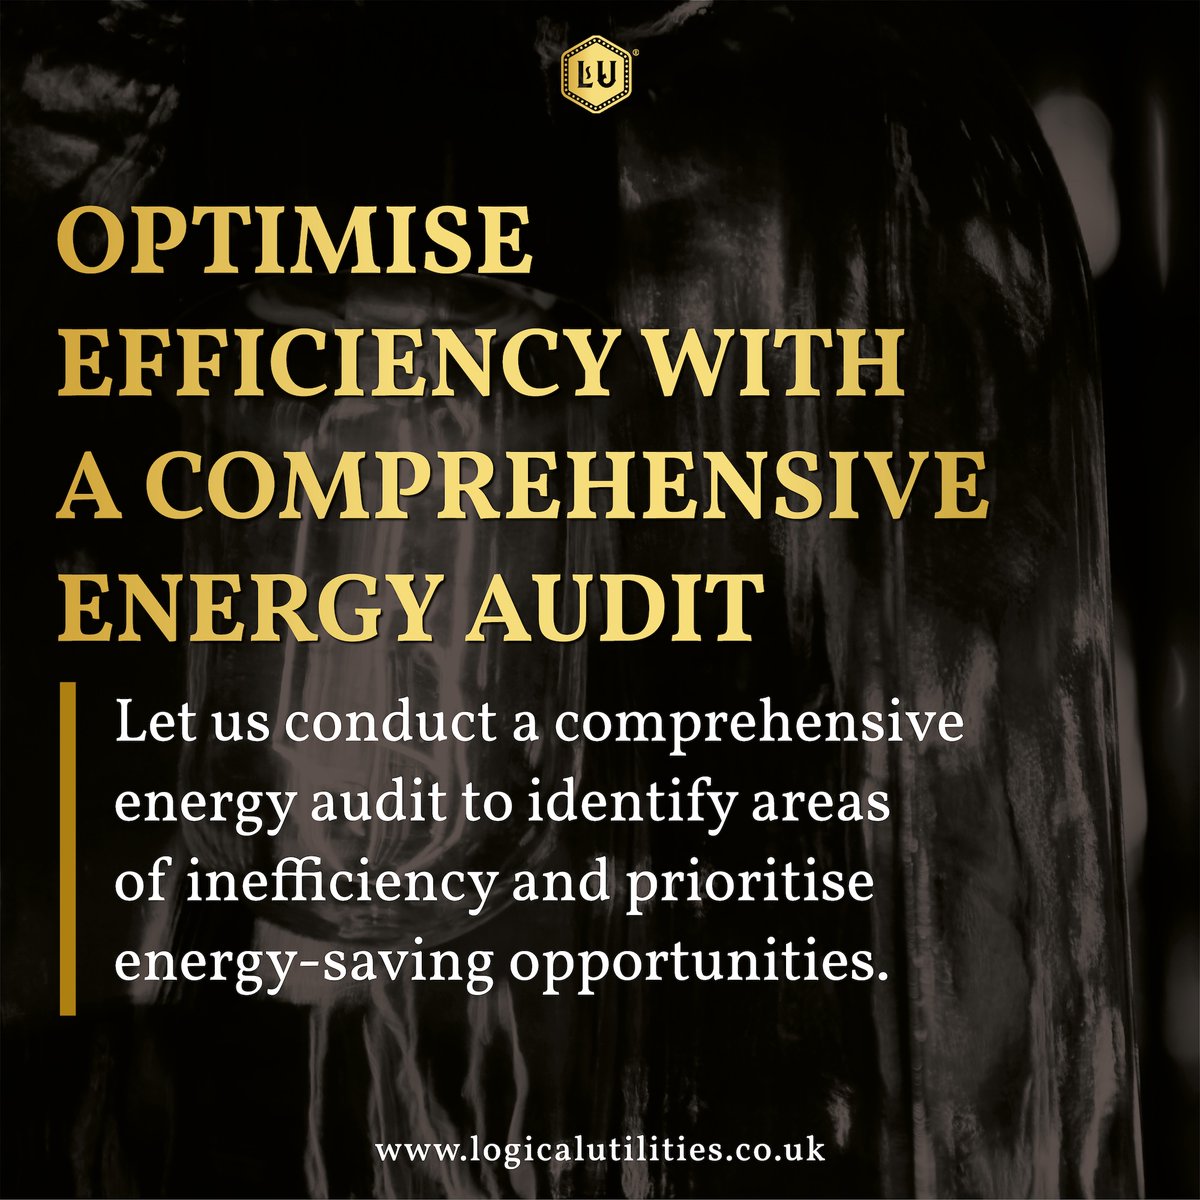 Get in touch if you're looking for support with your business energy requirements today 👇
📞 0845 113 0125
📩 info@logicalutilities.co.uk

#logicalutilities #logical #thelogicalapproach #energysaving